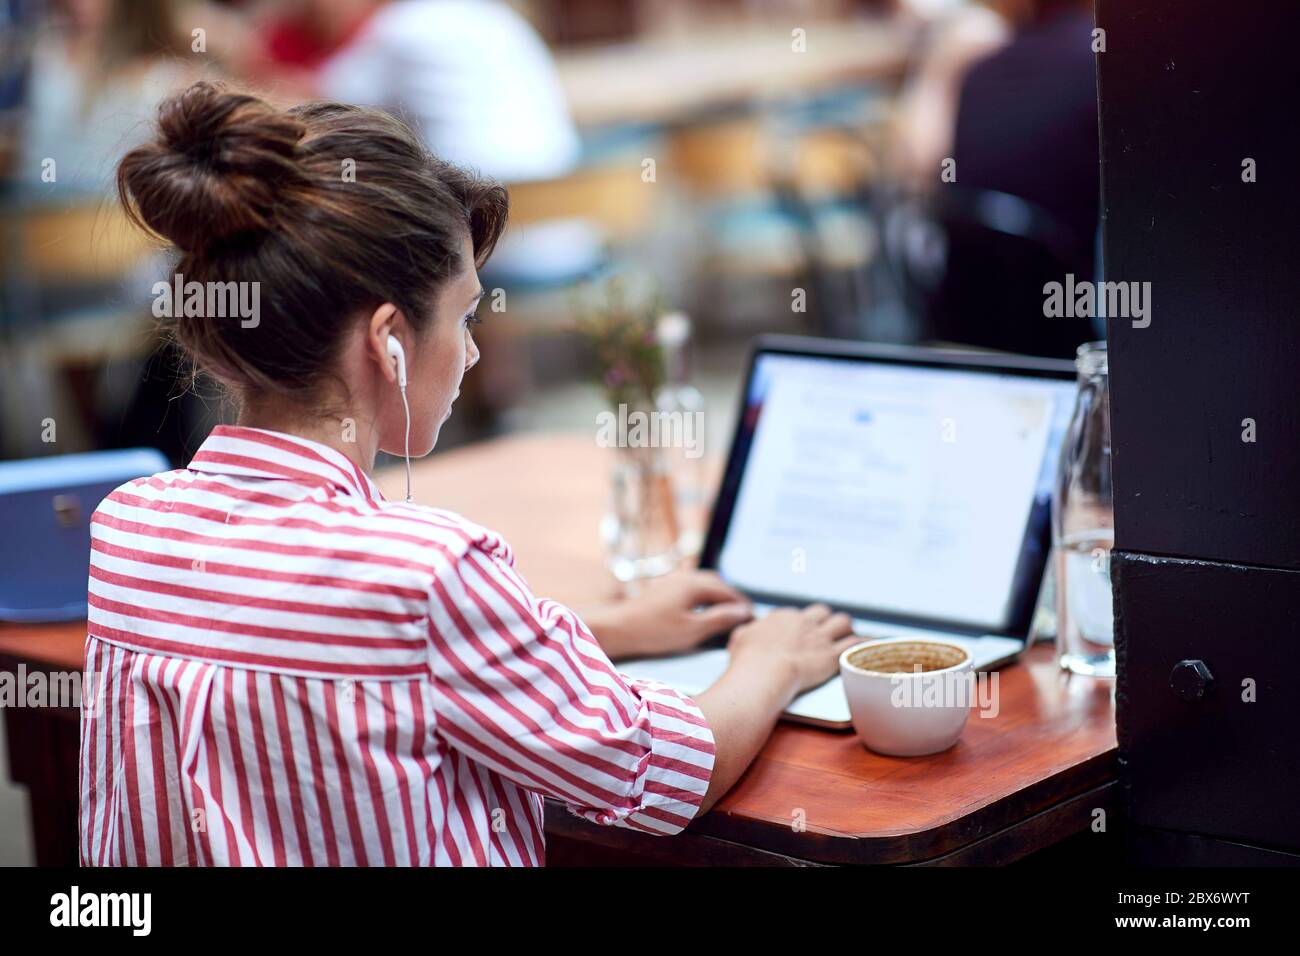 young woman typing on her laptop with headphones in ears at public place. copy space Stock Photo